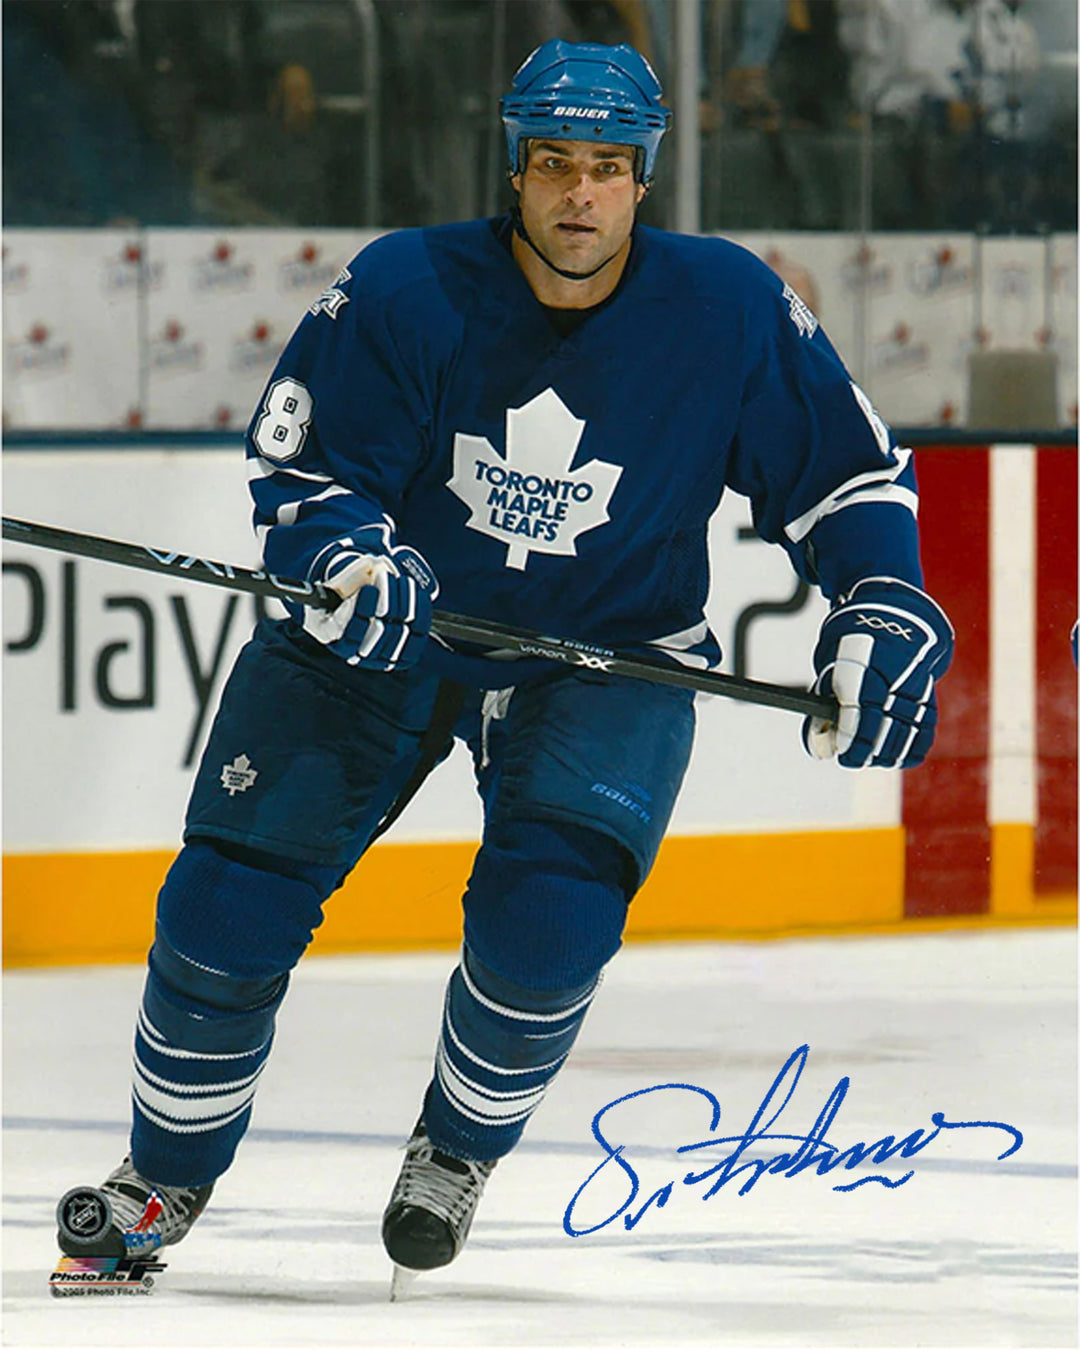 Eric Lindros Signed 8X10 Photo - Toronto Maple Leafs, Toronto Maple Leafs, NHL, Hockey, Autographed, Signed, AAHPH331046